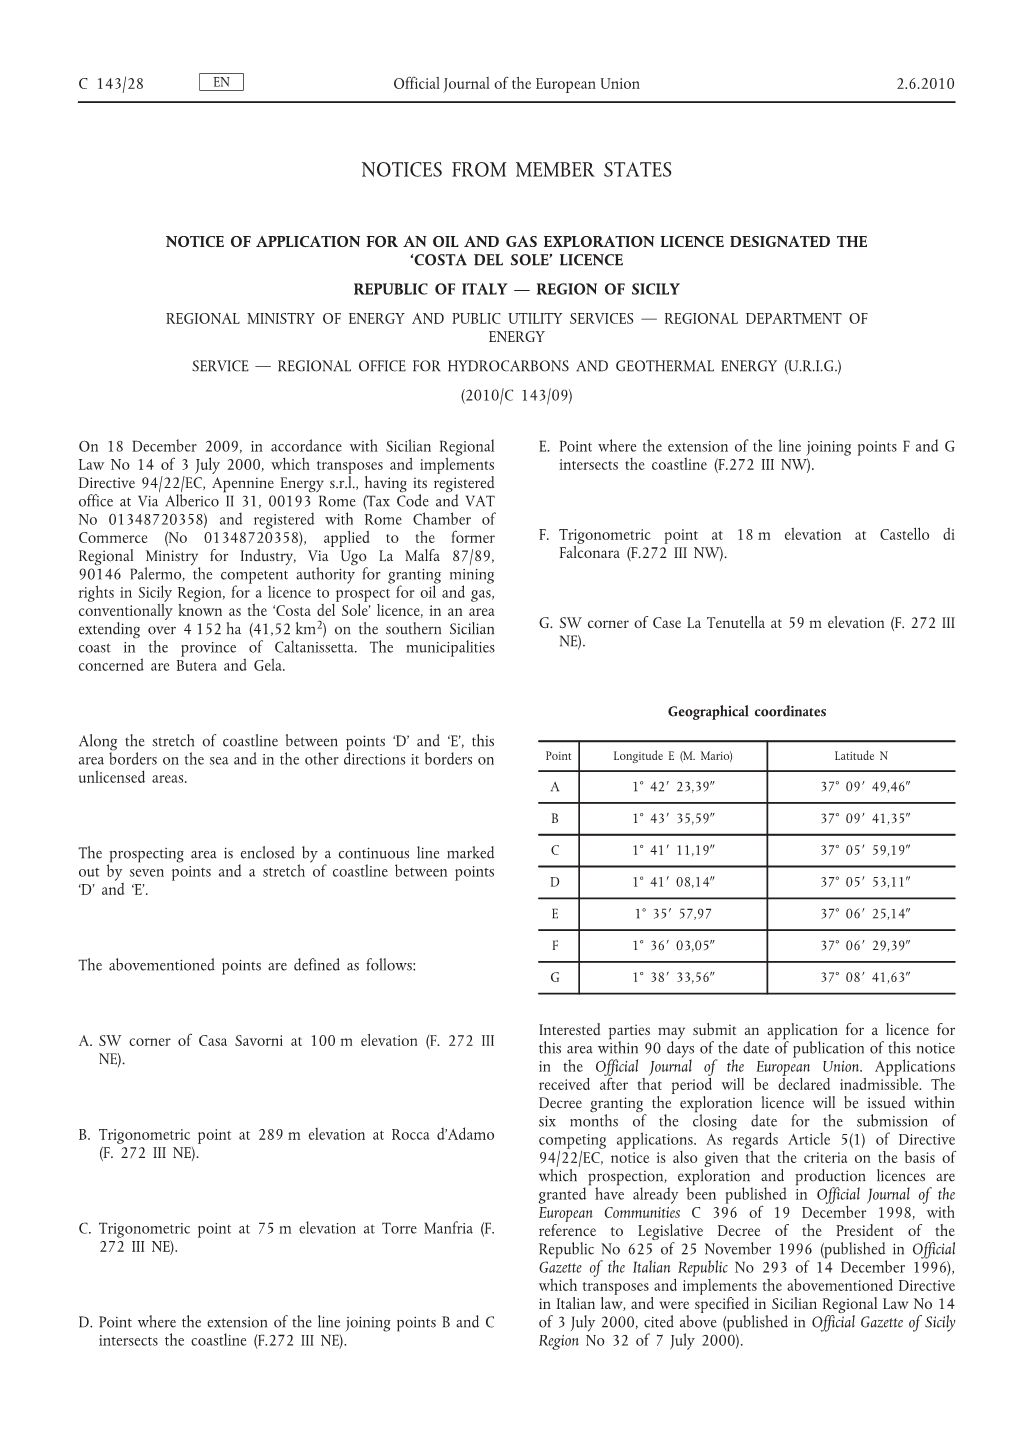 Notice of Application for an Oil and Gas Exploration Licence